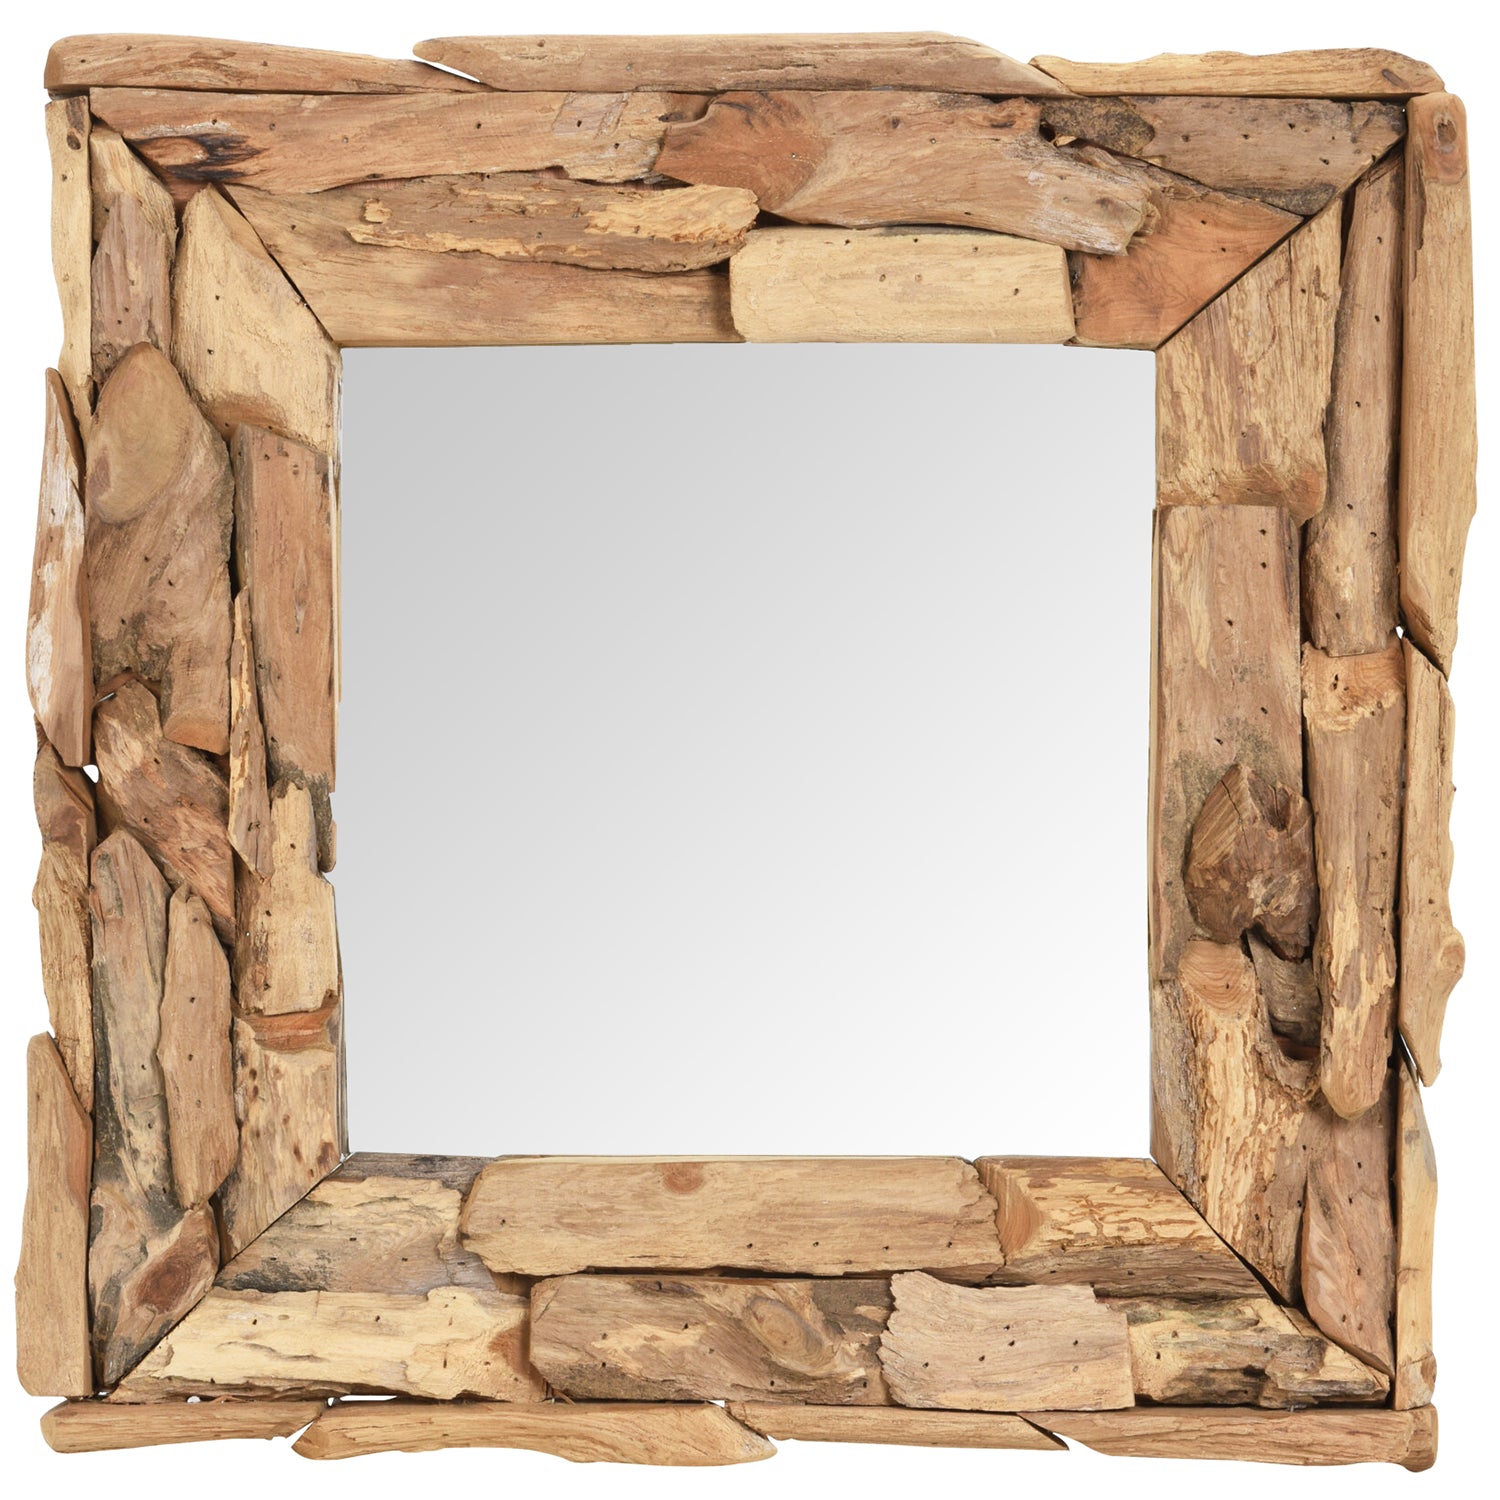 Wall Mirror with a Teak Wood Frame